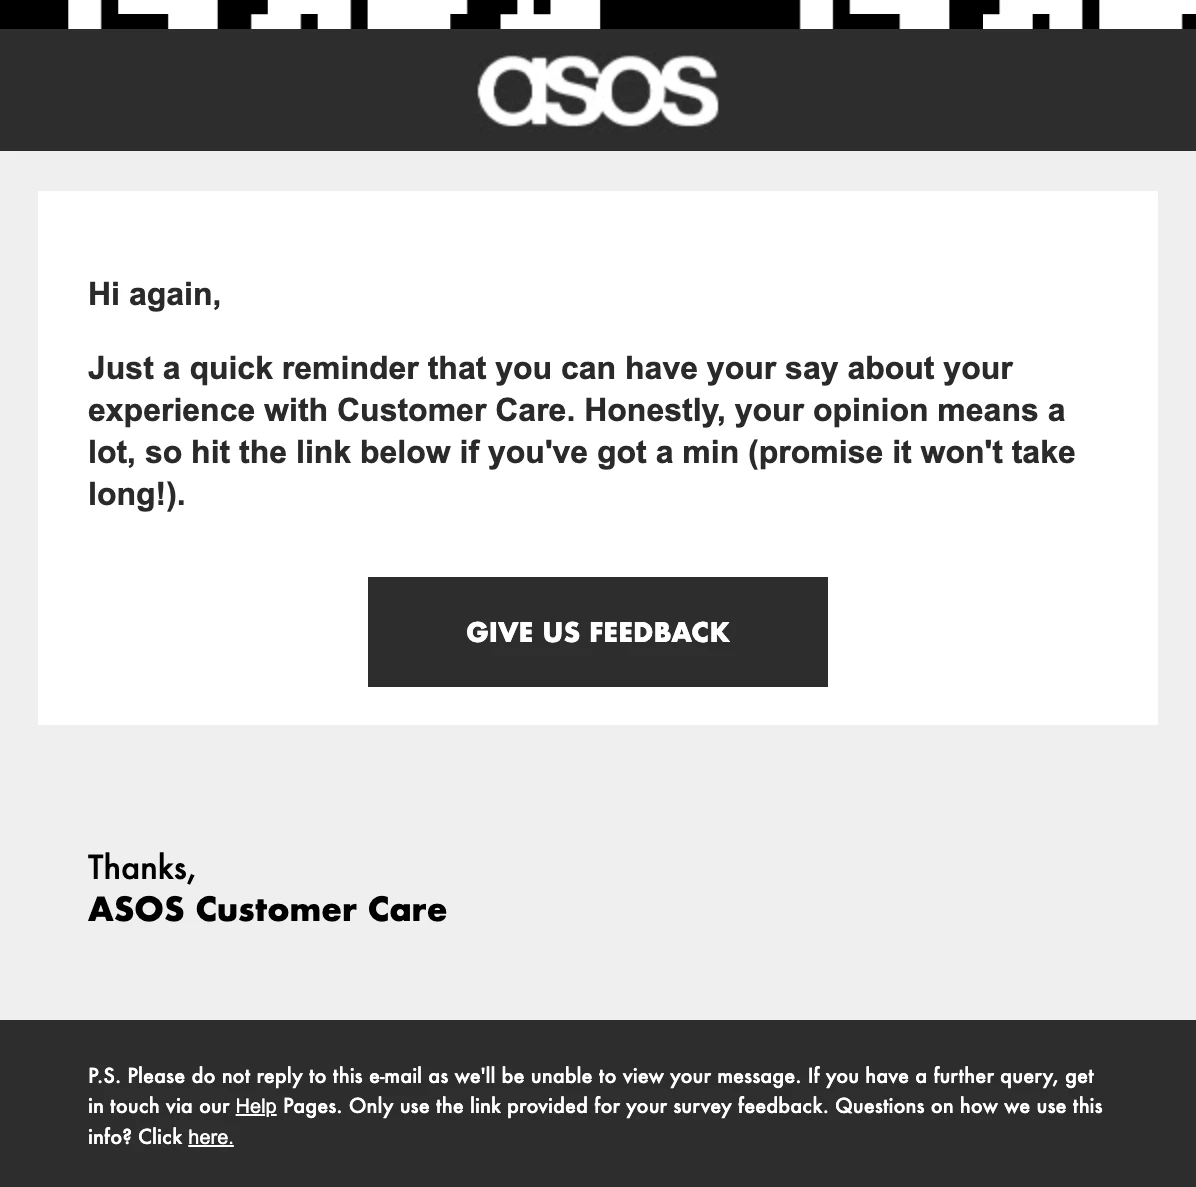 asos support feedback request email example. 